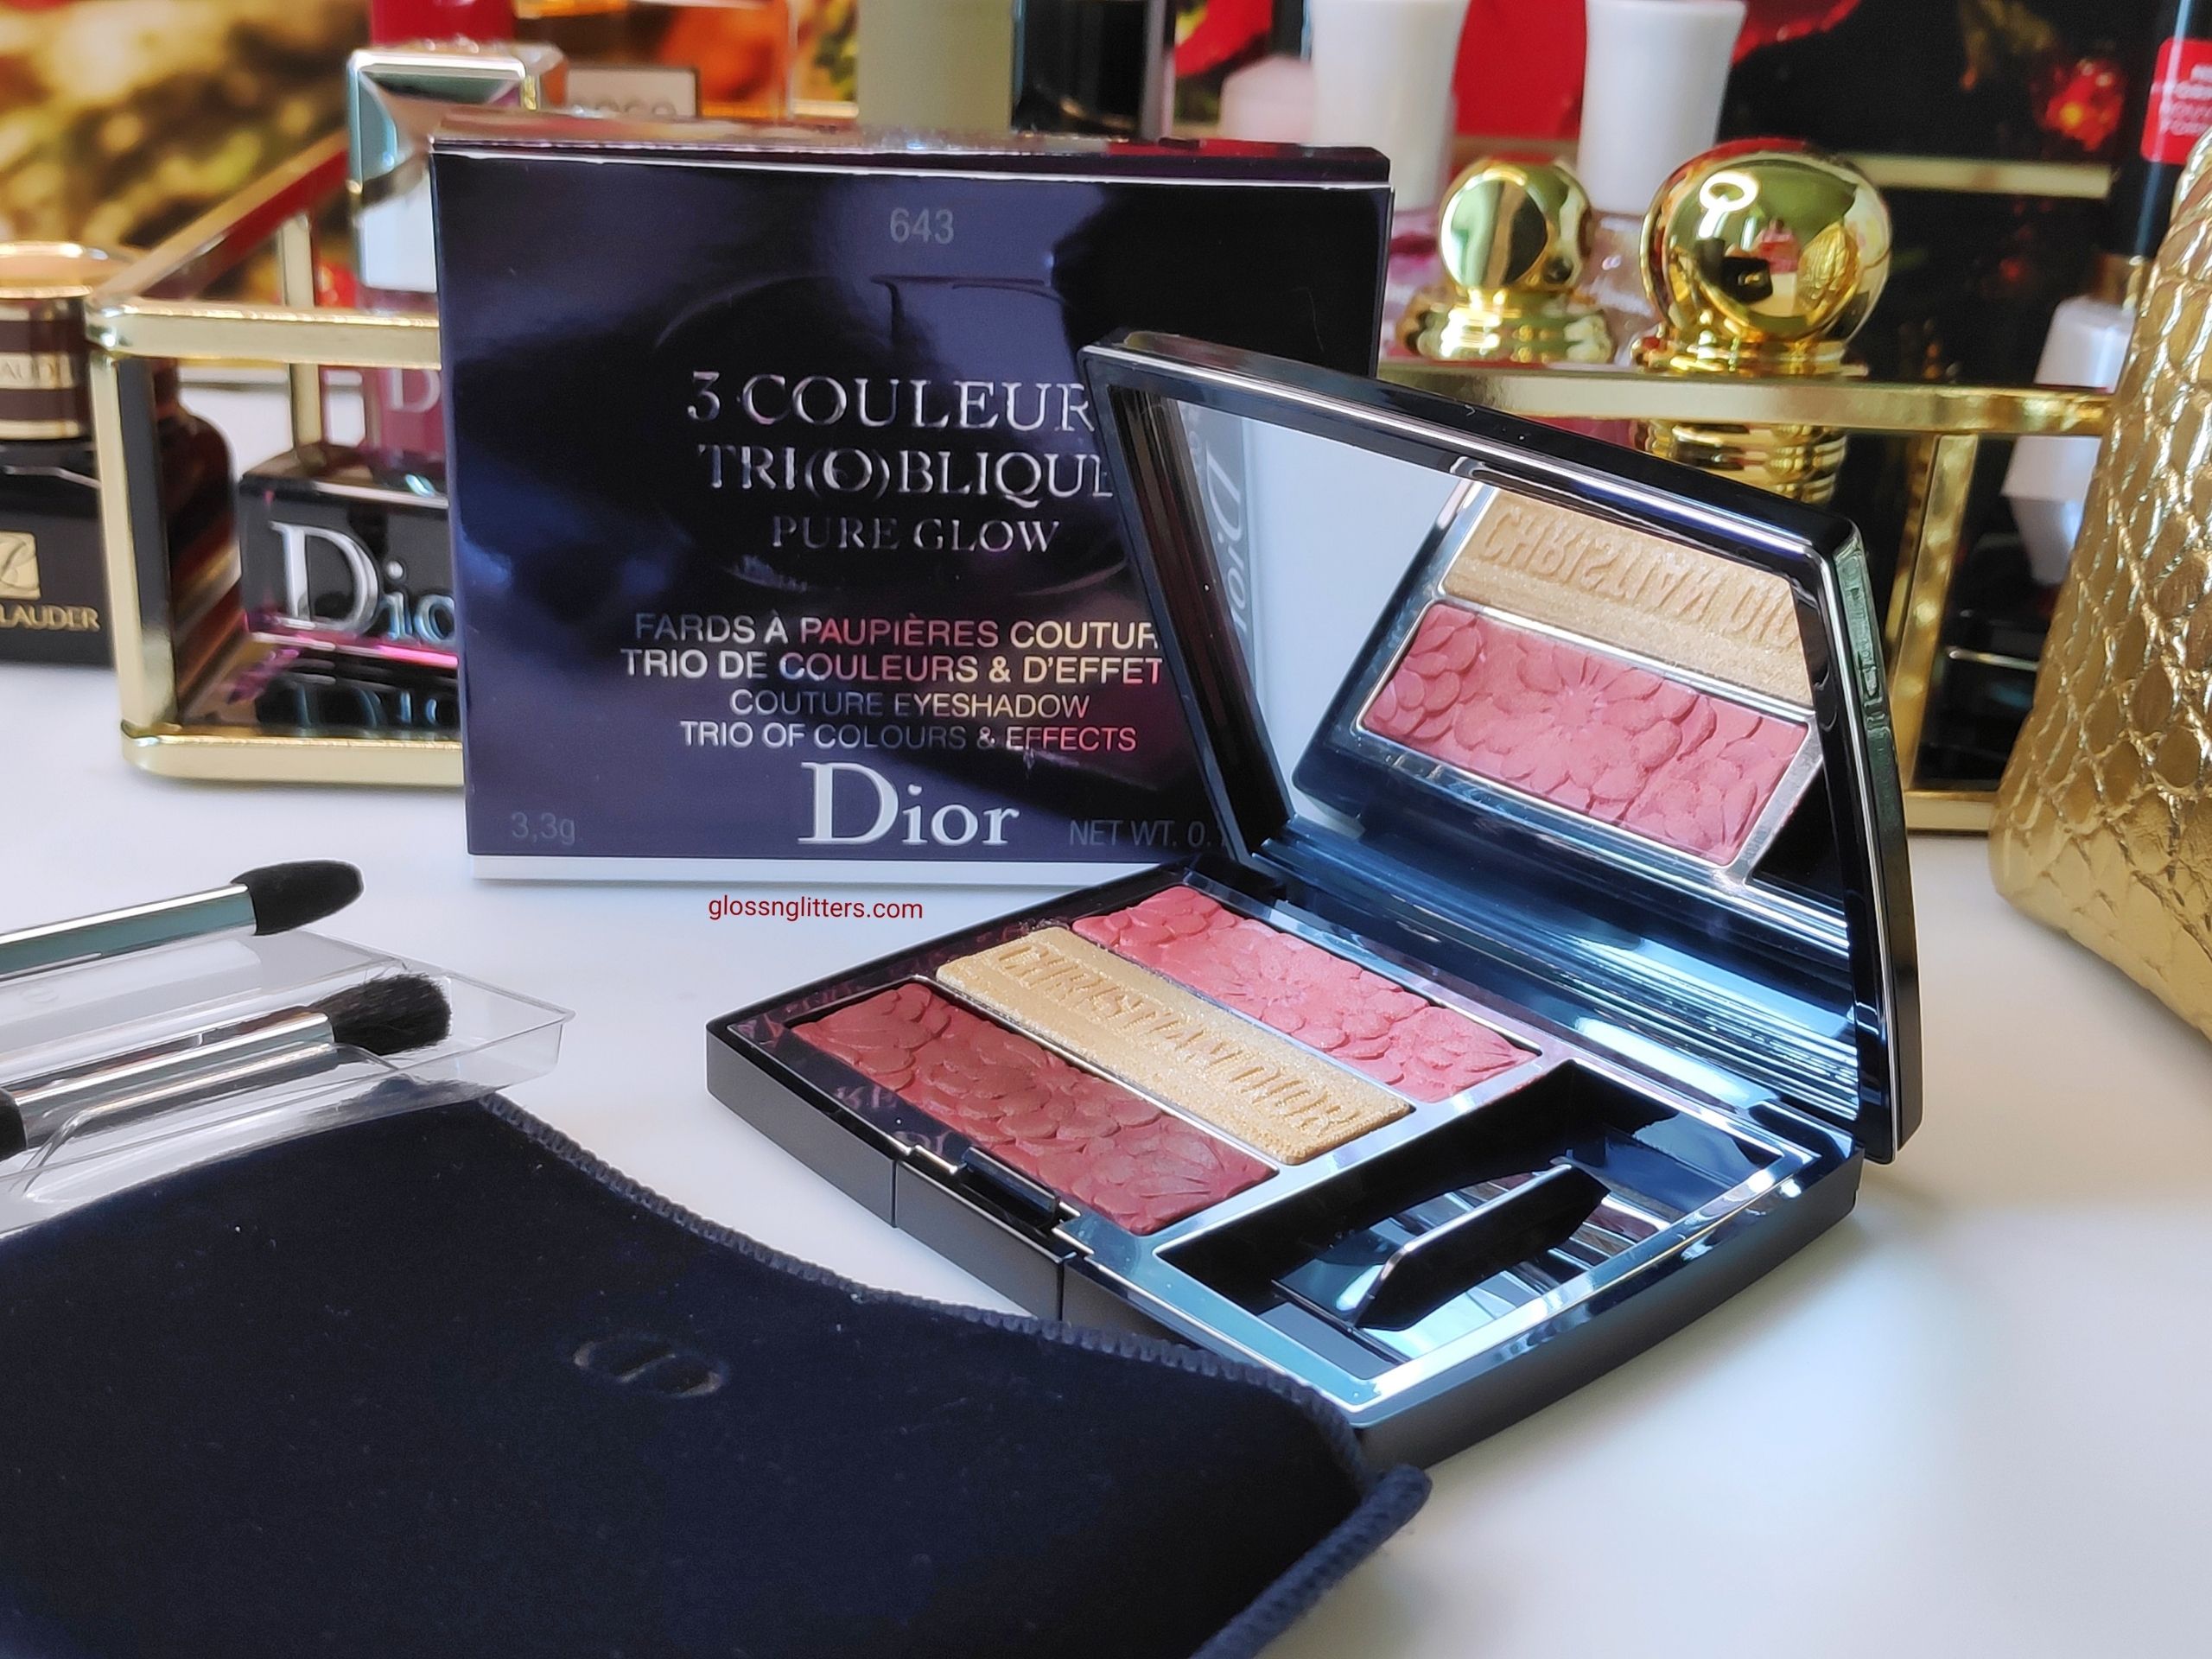 Dior 3 Couleurs Trioblique Pure Glow 643 Pure Petals Eyeshadow Palette  Review - Glossnglitters